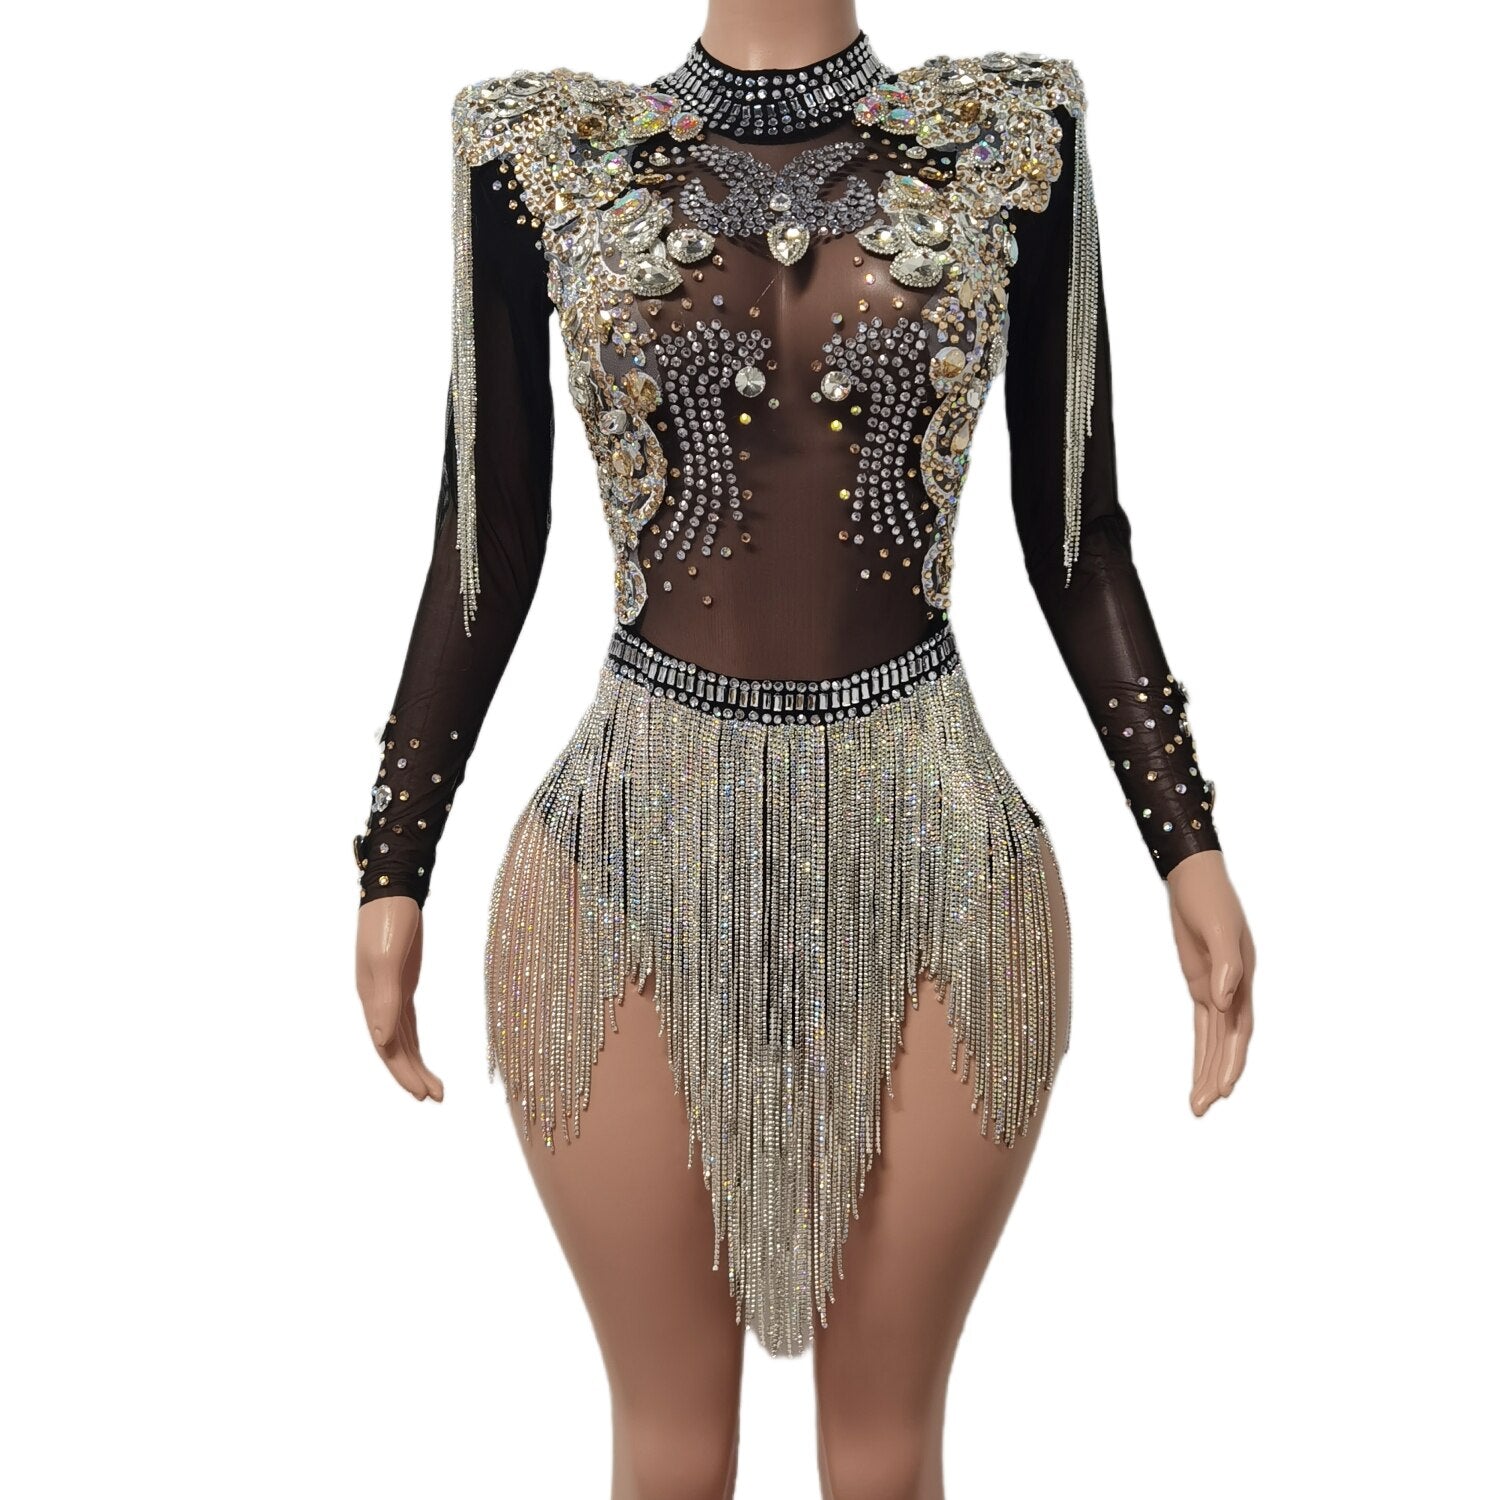 Luxury Bodycon Dress Sexy Rhinestone Tassel Dress Black Stage Show Jumpsuit Womens Rompers Casual Birthday Party Dresses